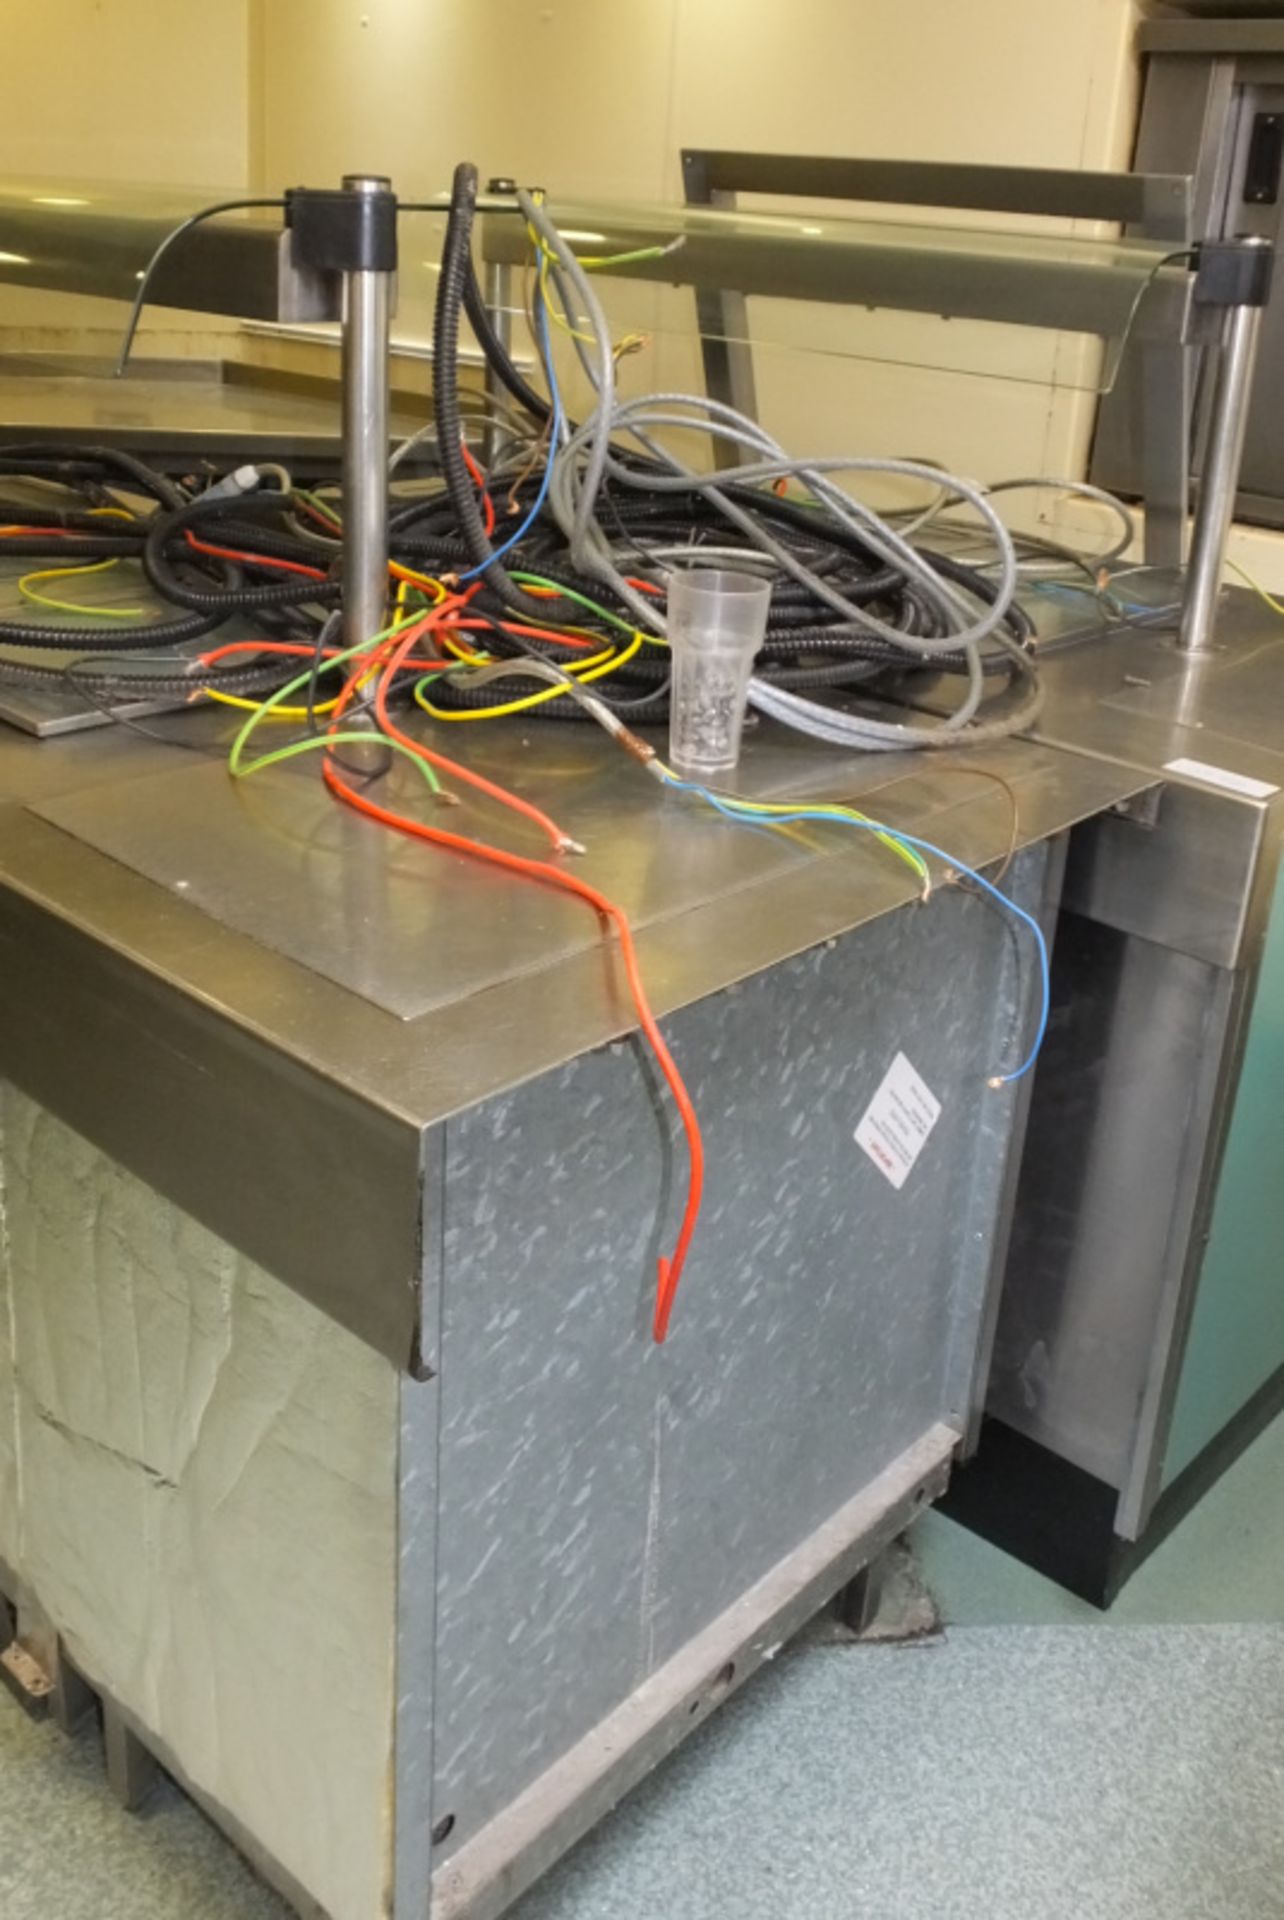 3x Moffat Servery Units with Hot Cupboard, Bain Marie & Plate Lift - 240v - dimensions in desc. - Image 8 of 9